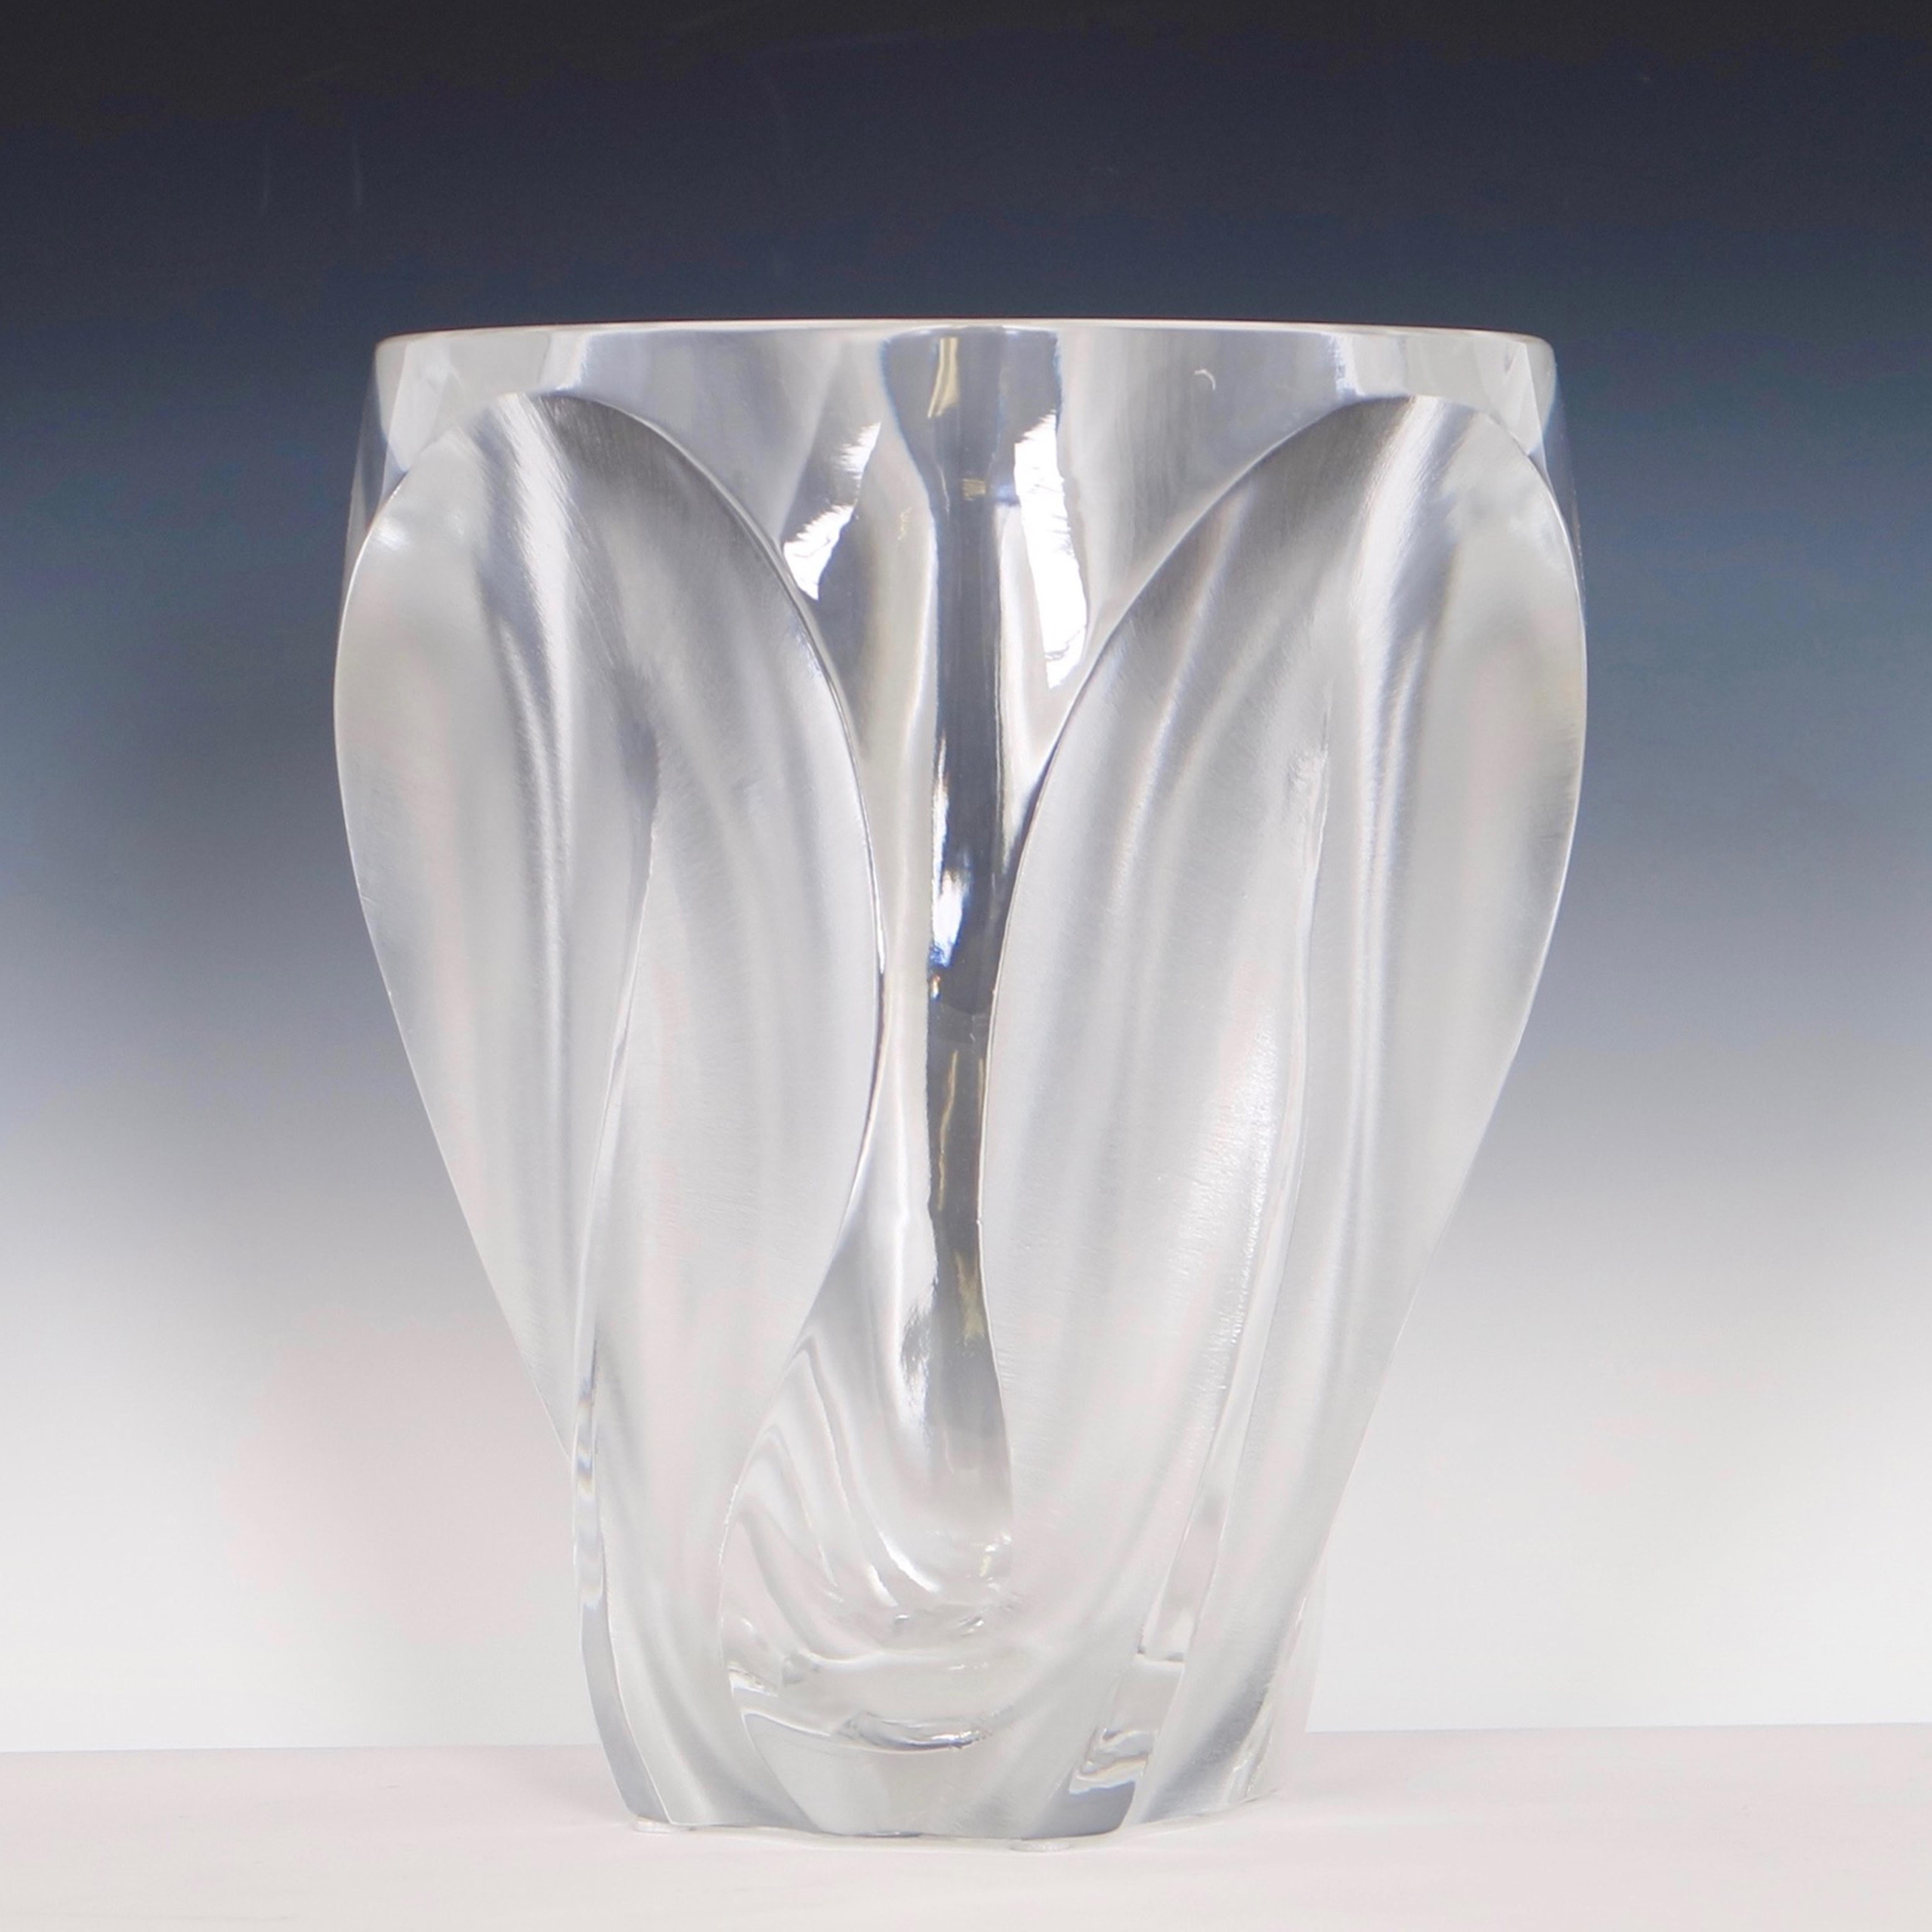 Lalique Ingrid vase designed by Marc Lalique, circa 1964. Crafted in a mix of satin and clear crystal glass the piece features petal like cut outs on four sides. The vase includes the signature Lalique France. Wear appropriate to age and use. The